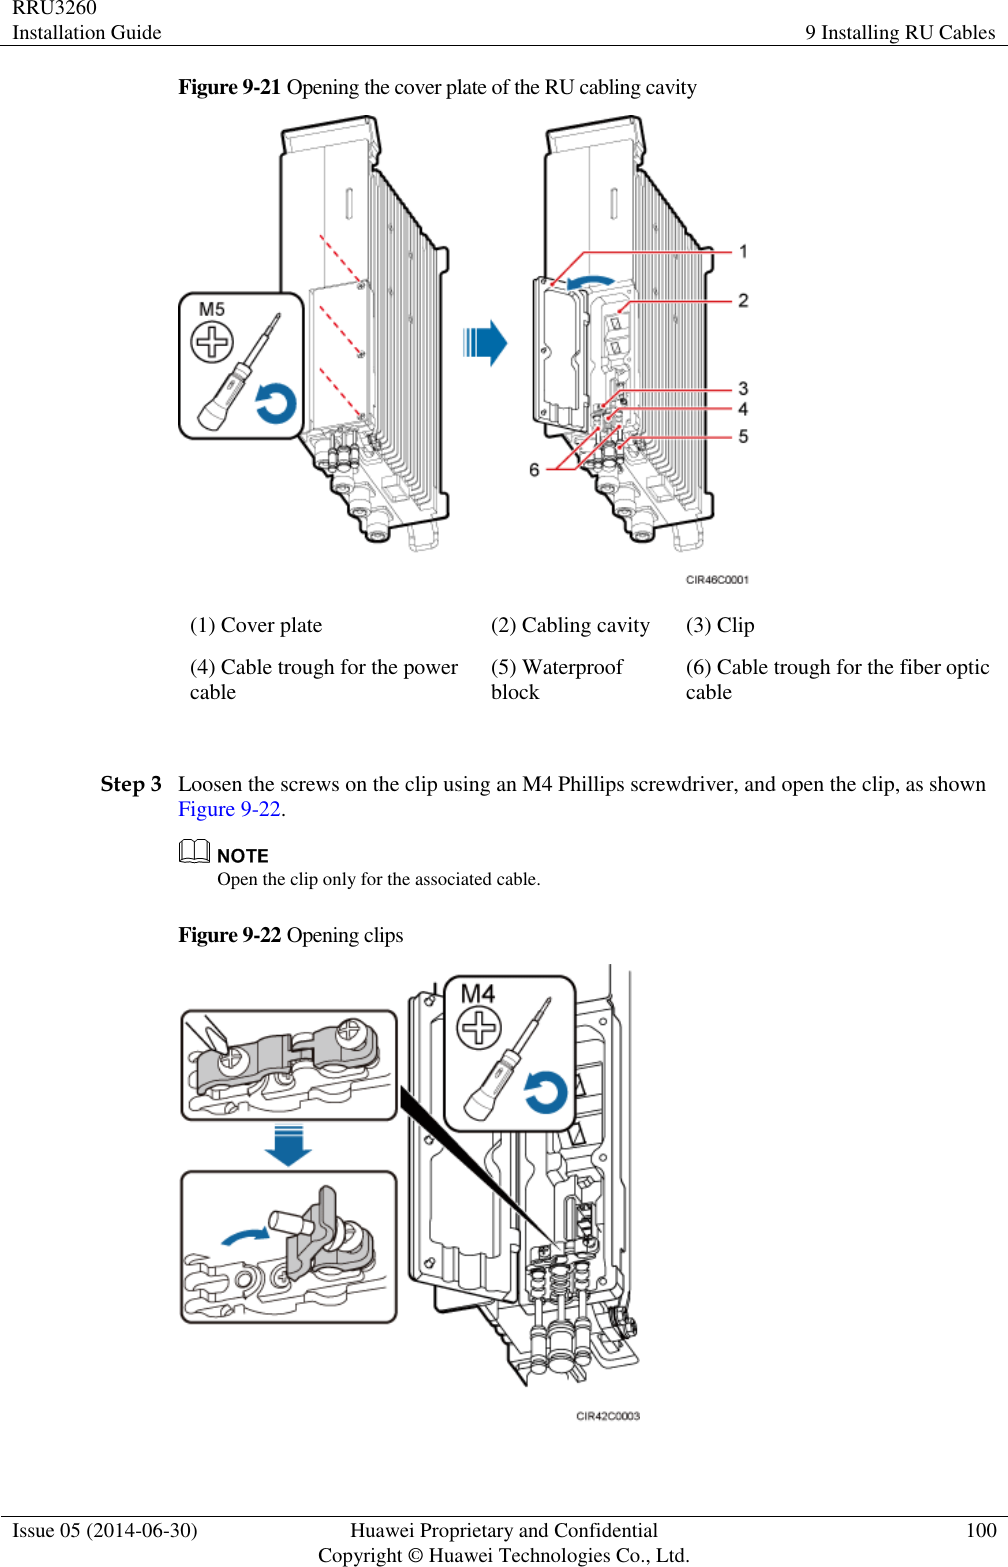 RRU3260 Installation Guide 9 Installing RU Cables  Issue 05 (2014-06-30) Huawei Proprietary and Confidential                                     Copyright © Huawei Technologies Co., Ltd. 100  Figure 9-21 Opening the cover plate of the RU cabling cavity  (1) Cover plate (2) Cabling cavity (3) Clip (4) Cable trough for the power cable (5) Waterproof block (6) Cable trough for the fiber optic cable  Step 3 Loosen the screws on the clip using an M4 Phillips screwdriver, and open the clip, as shown Figure 9-22.  Open the clip only for the associated cable. Figure 9-22 Opening clips   